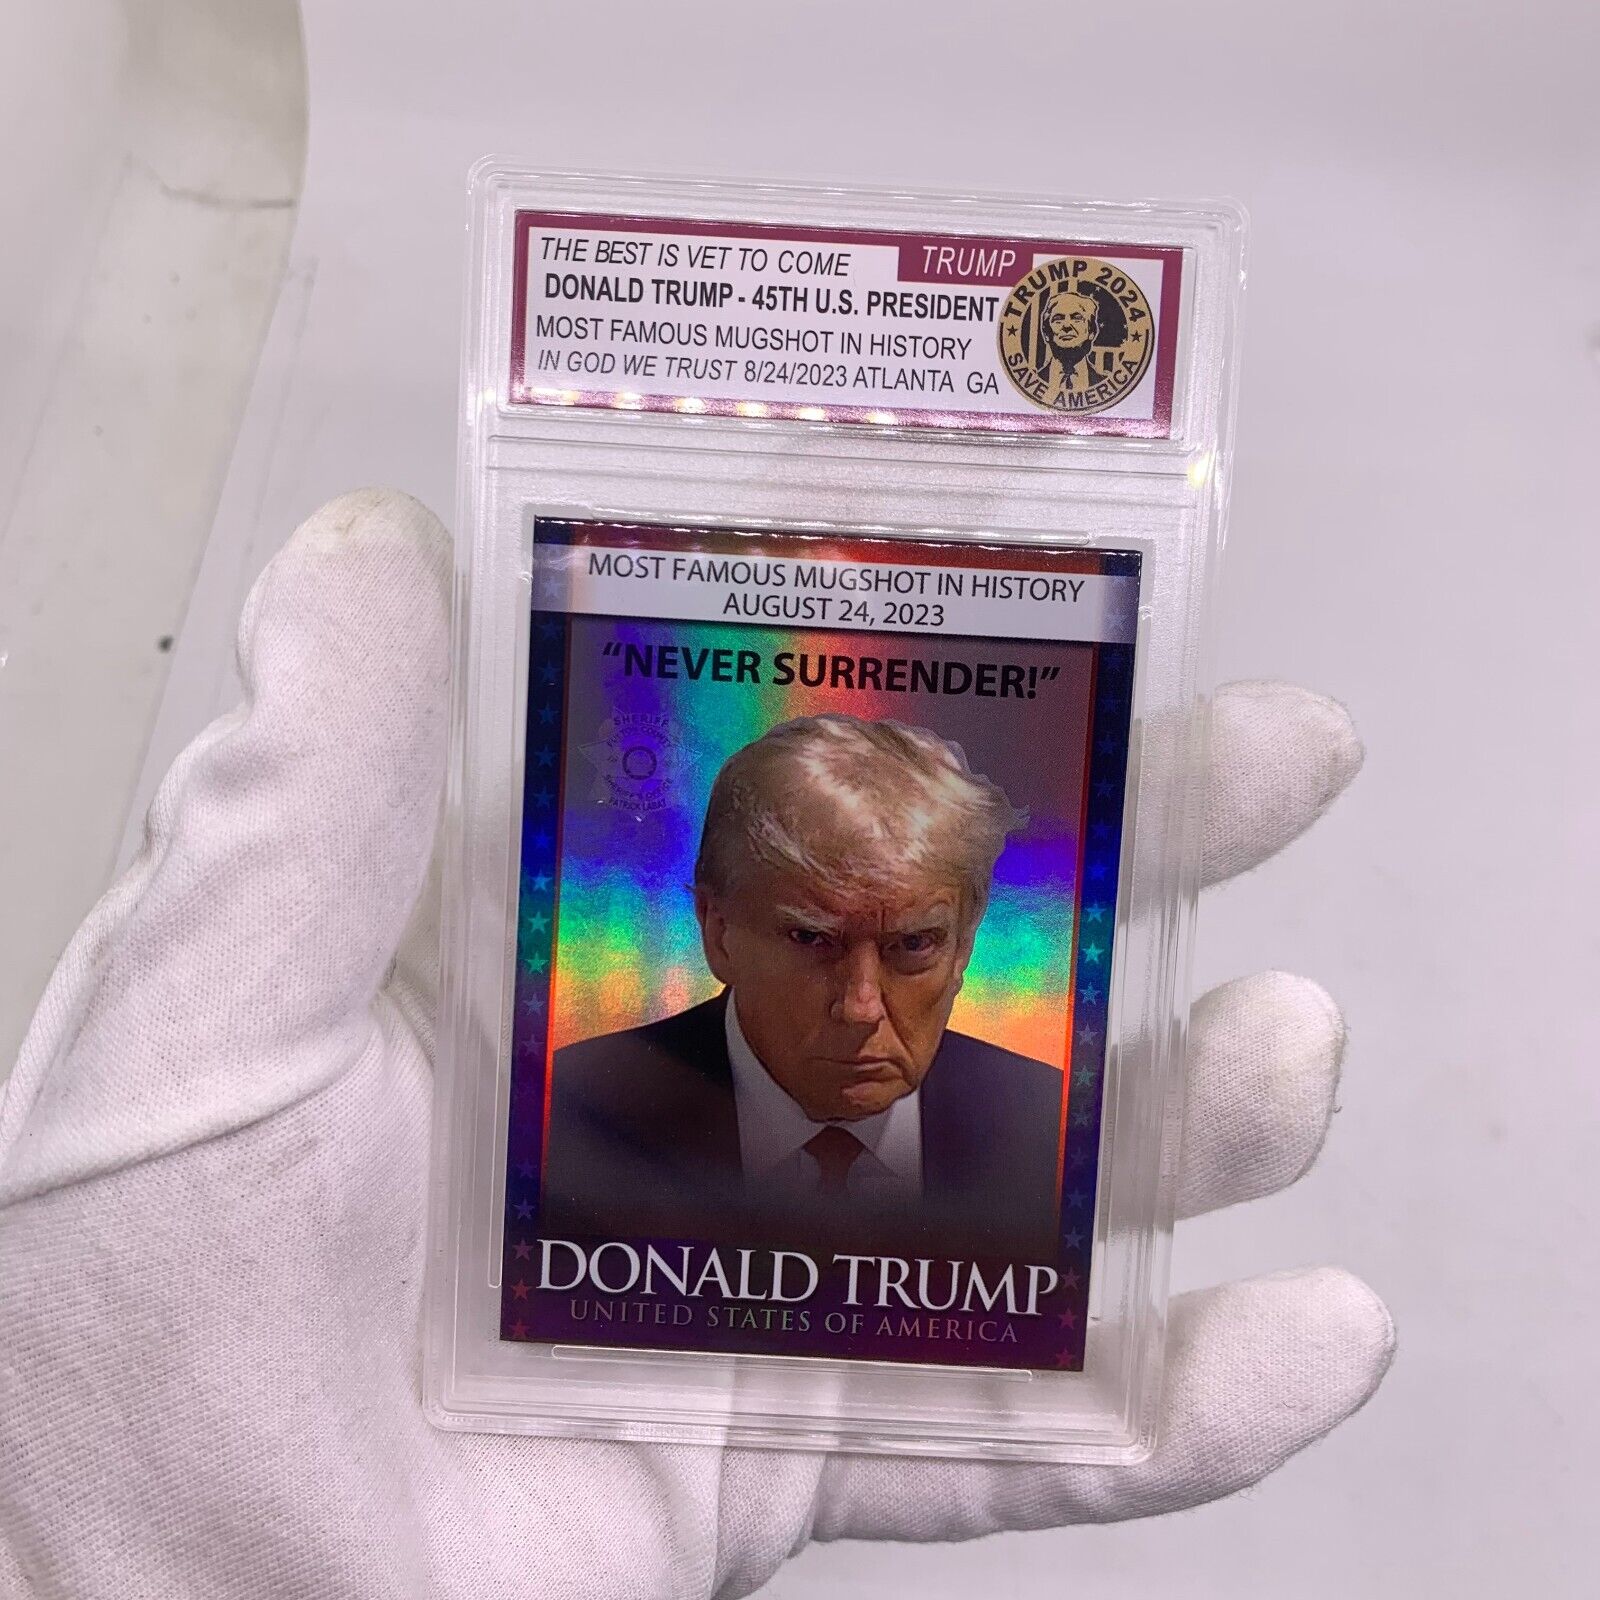 DONALD TRUMP President Never Surrender MUGSHOT Photo Collectible Trading Card